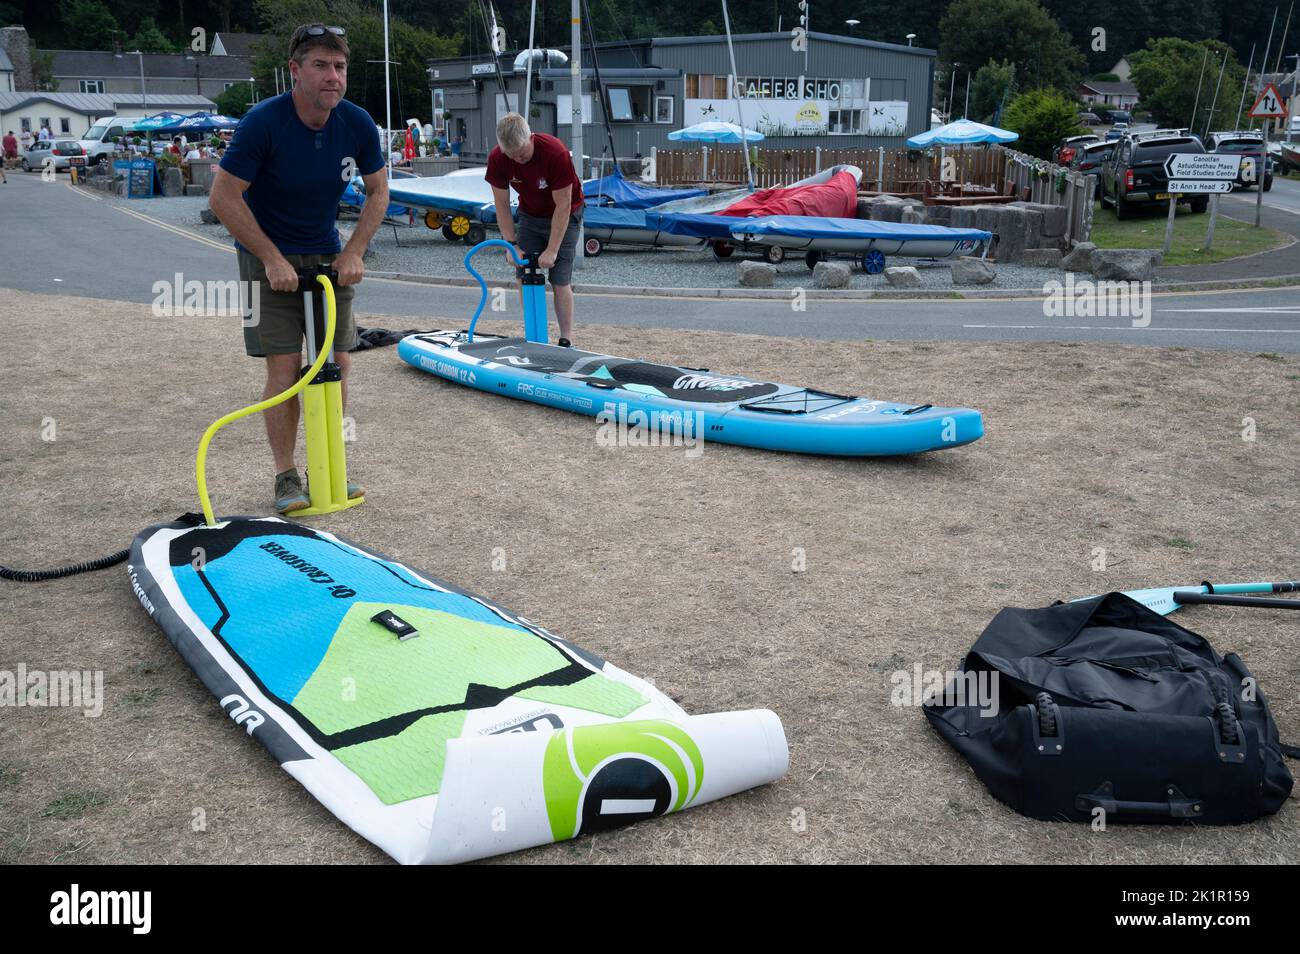 Wales, Pembrokeshire. Dale village. Blowing up an inflateable paddle board Stock Photo